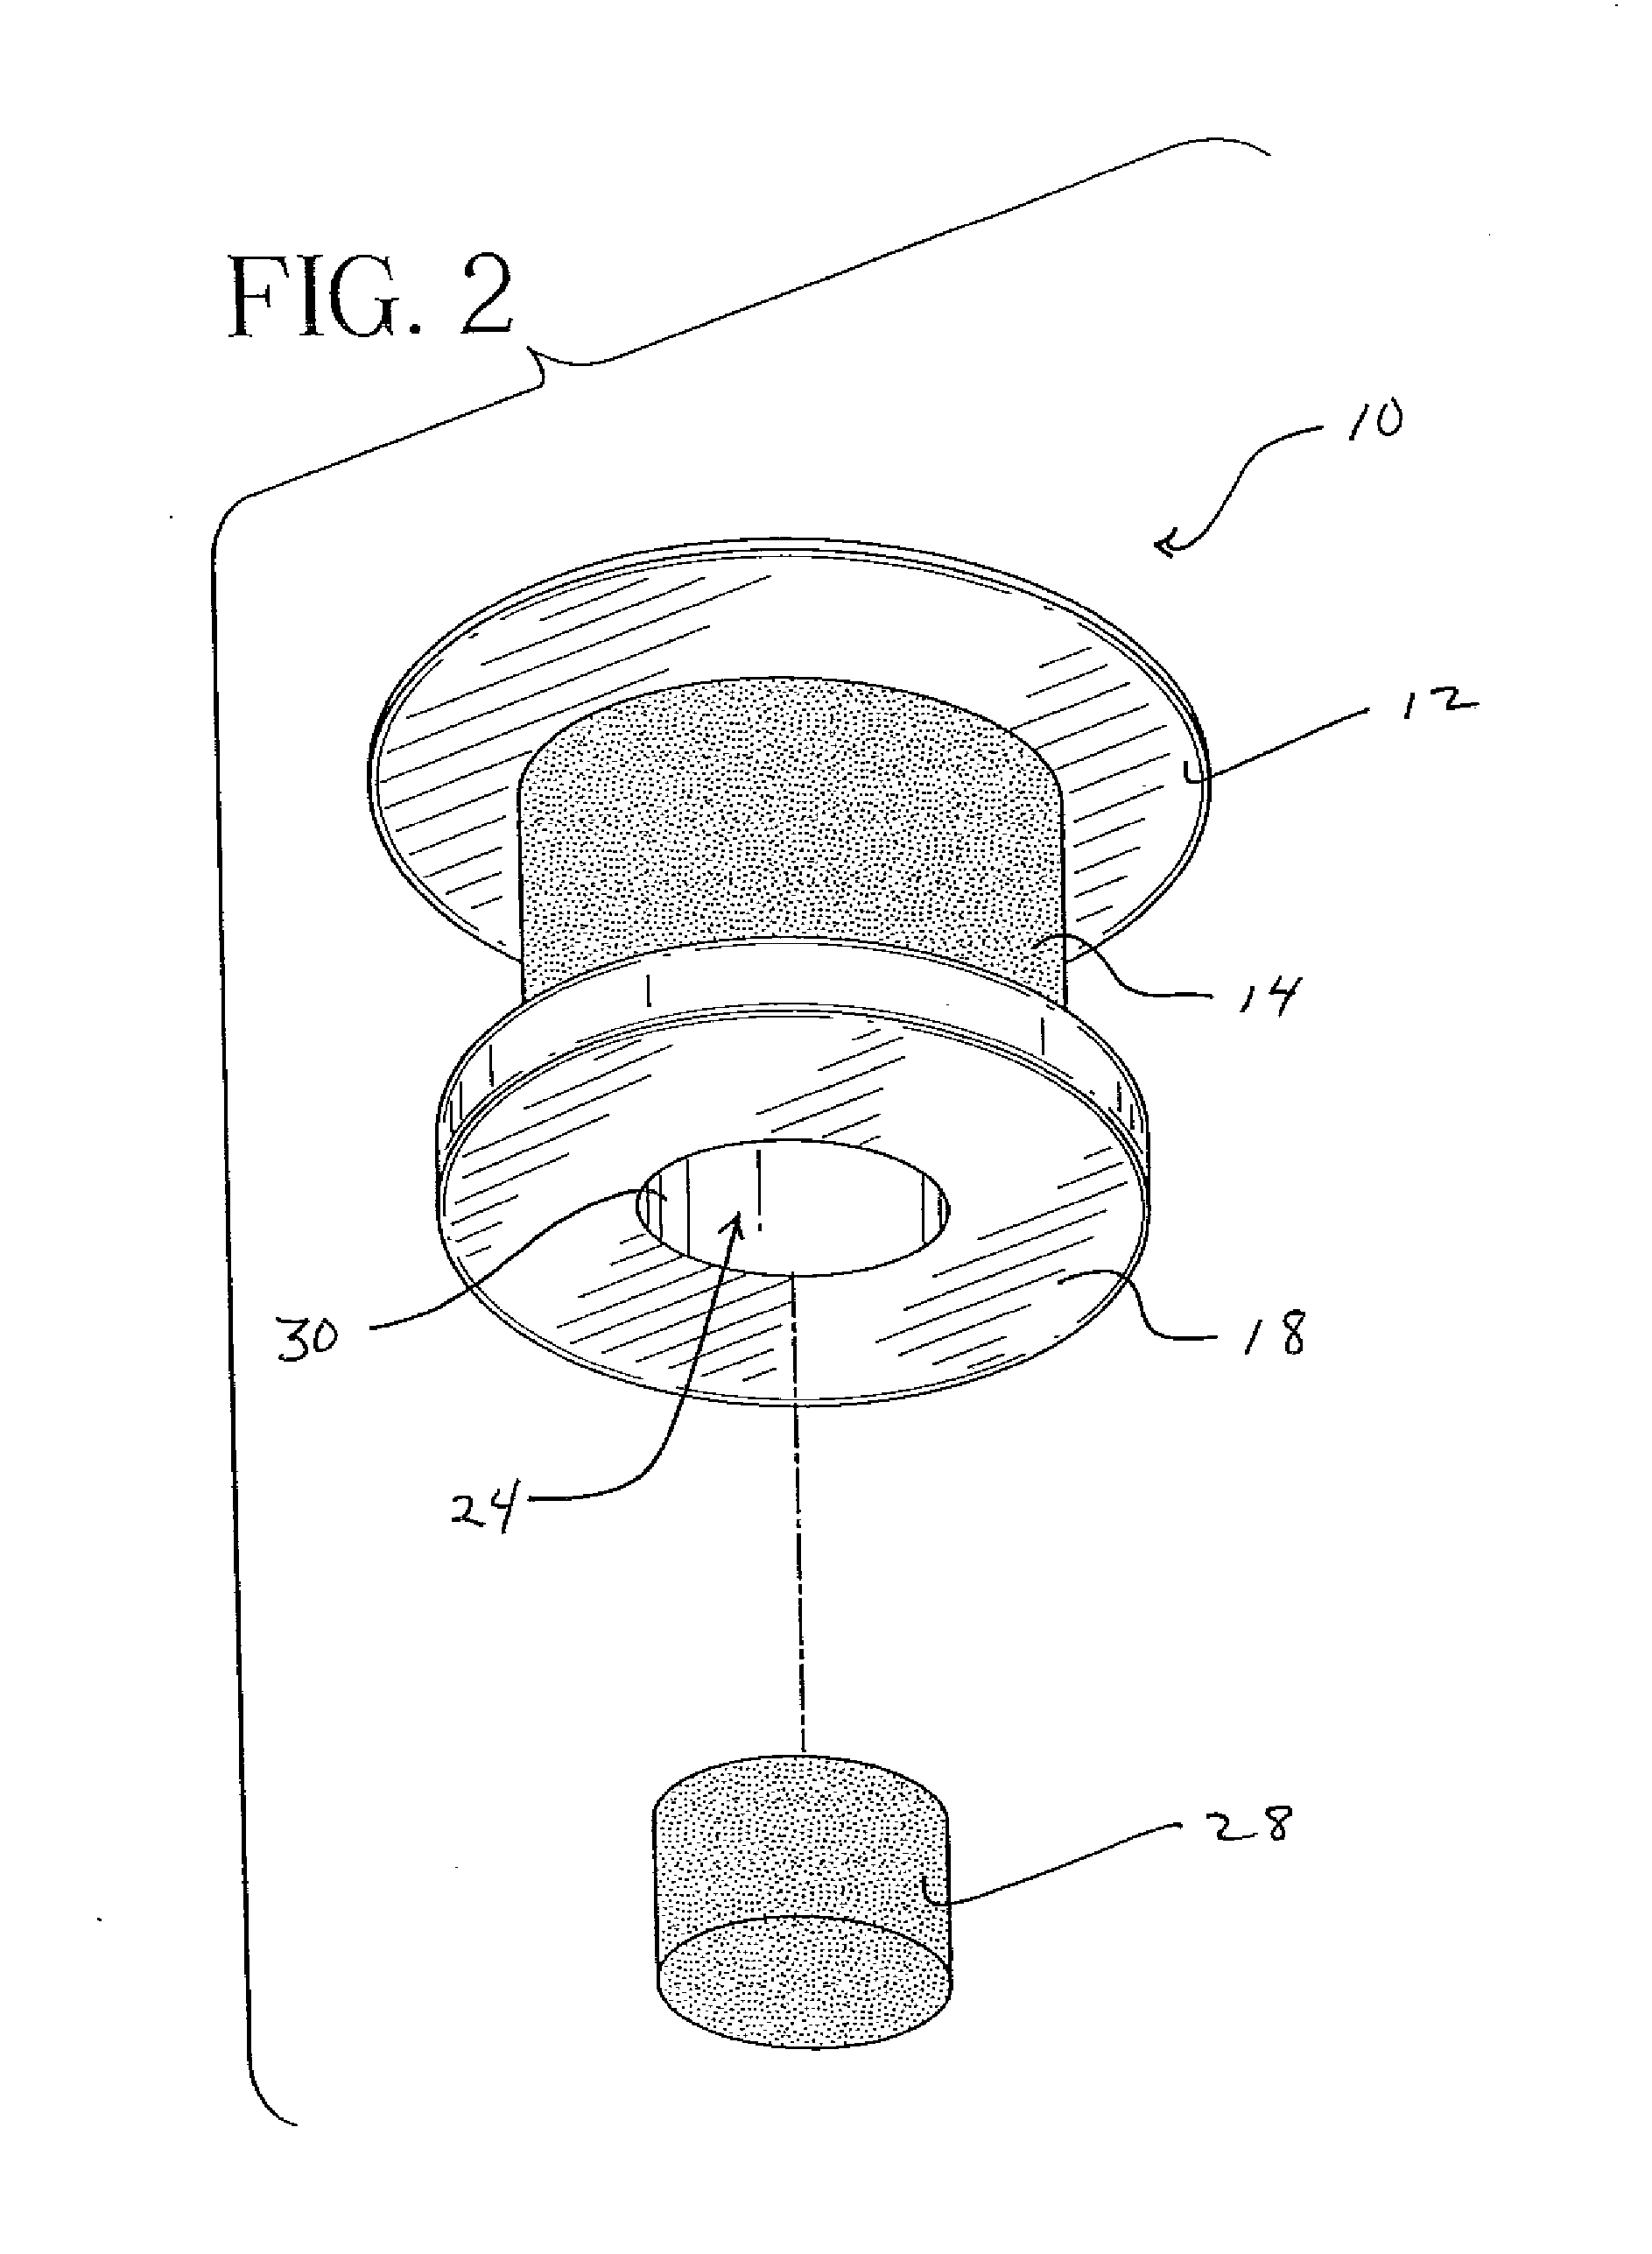 Systems and Methods for Reducing Intraocular Pressure